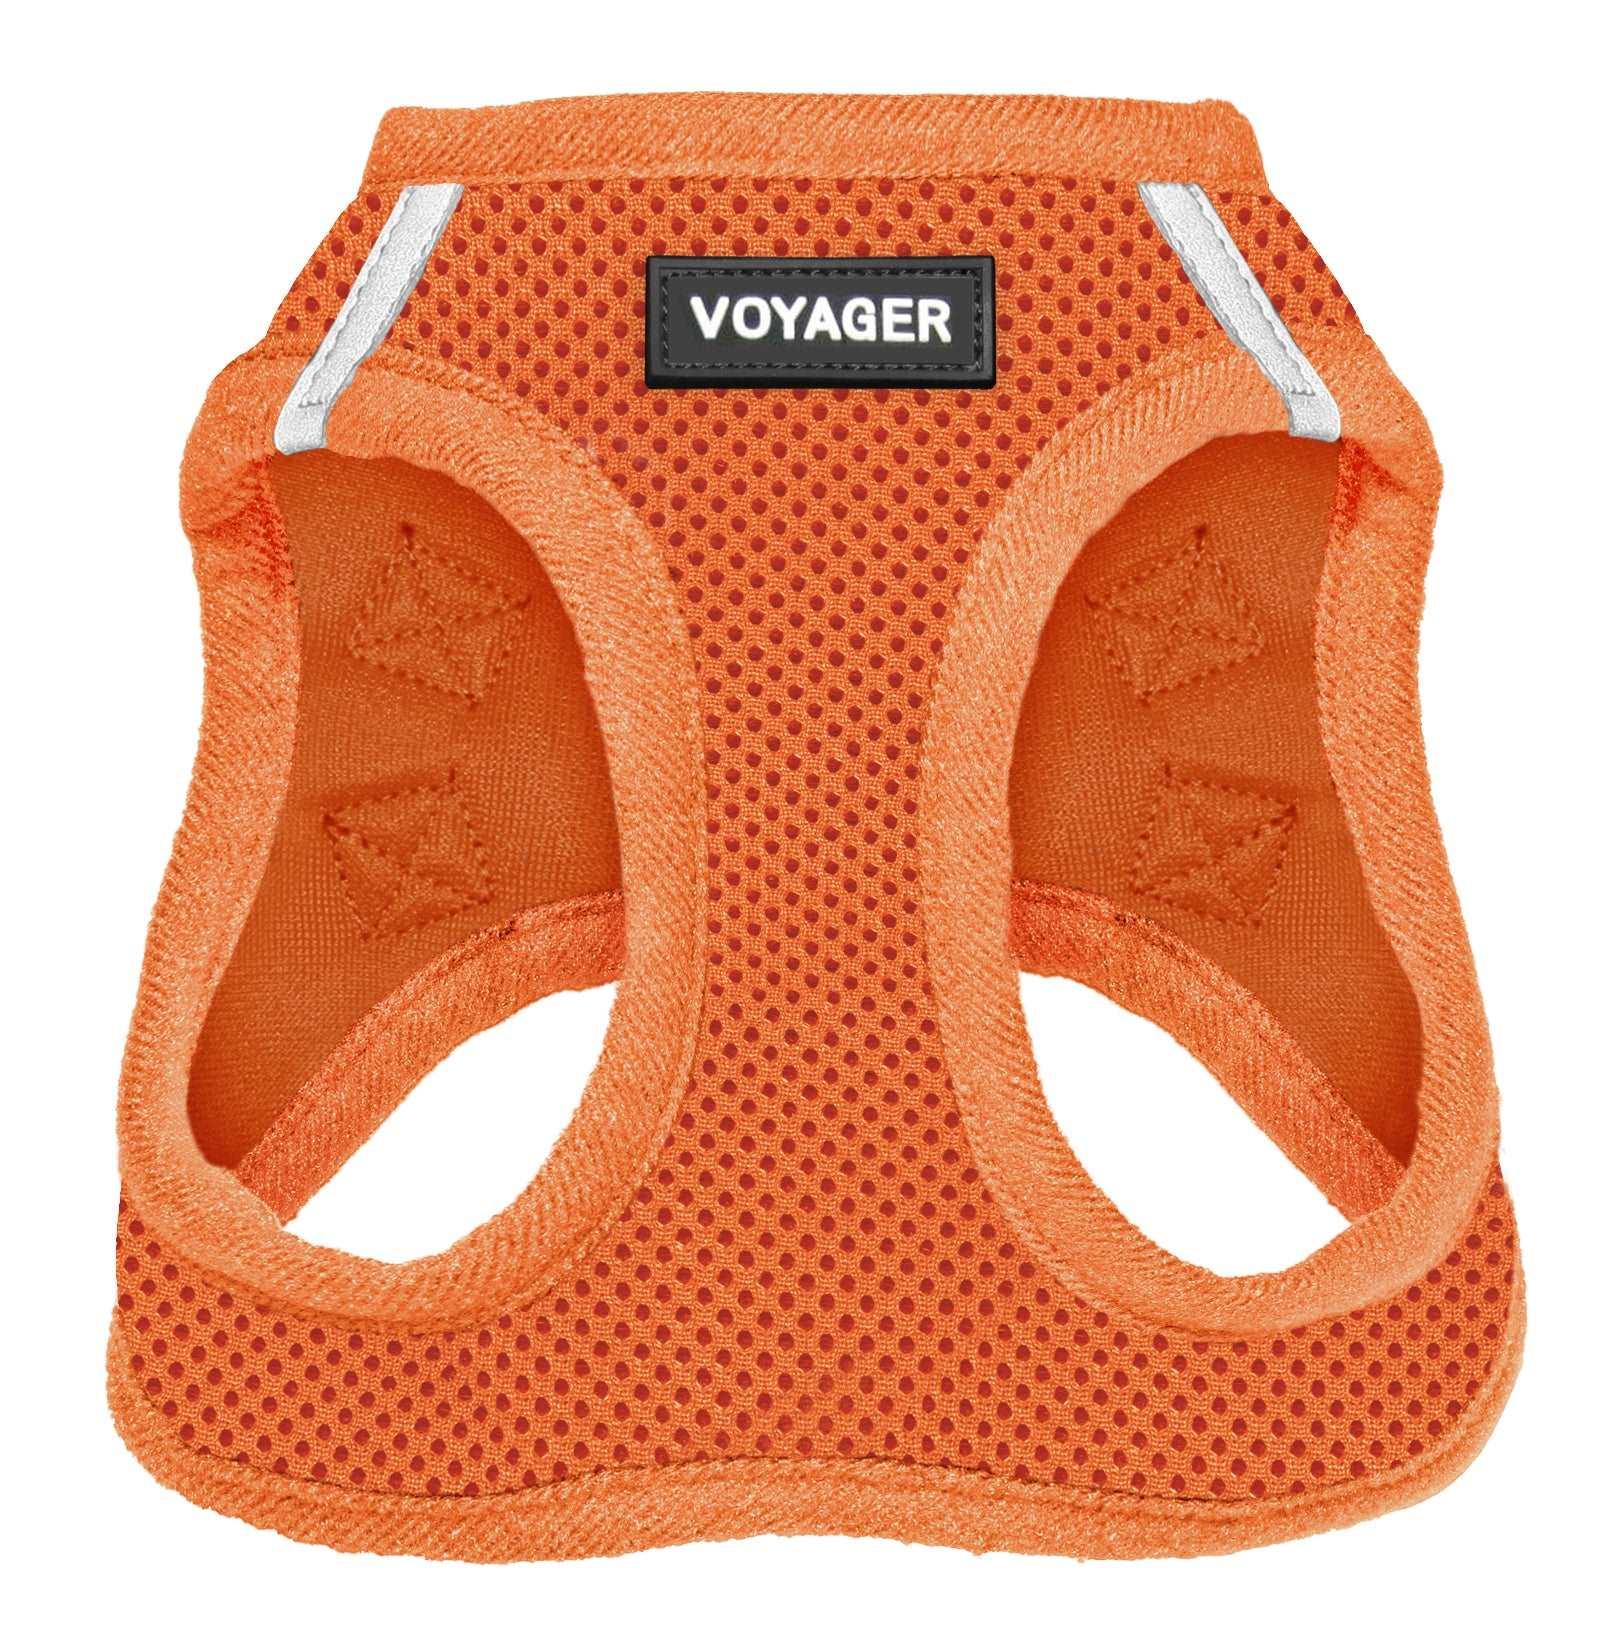 VOYAGER Step-In Air Pet Harness in Orange with Matching Trim and Webbing - Front